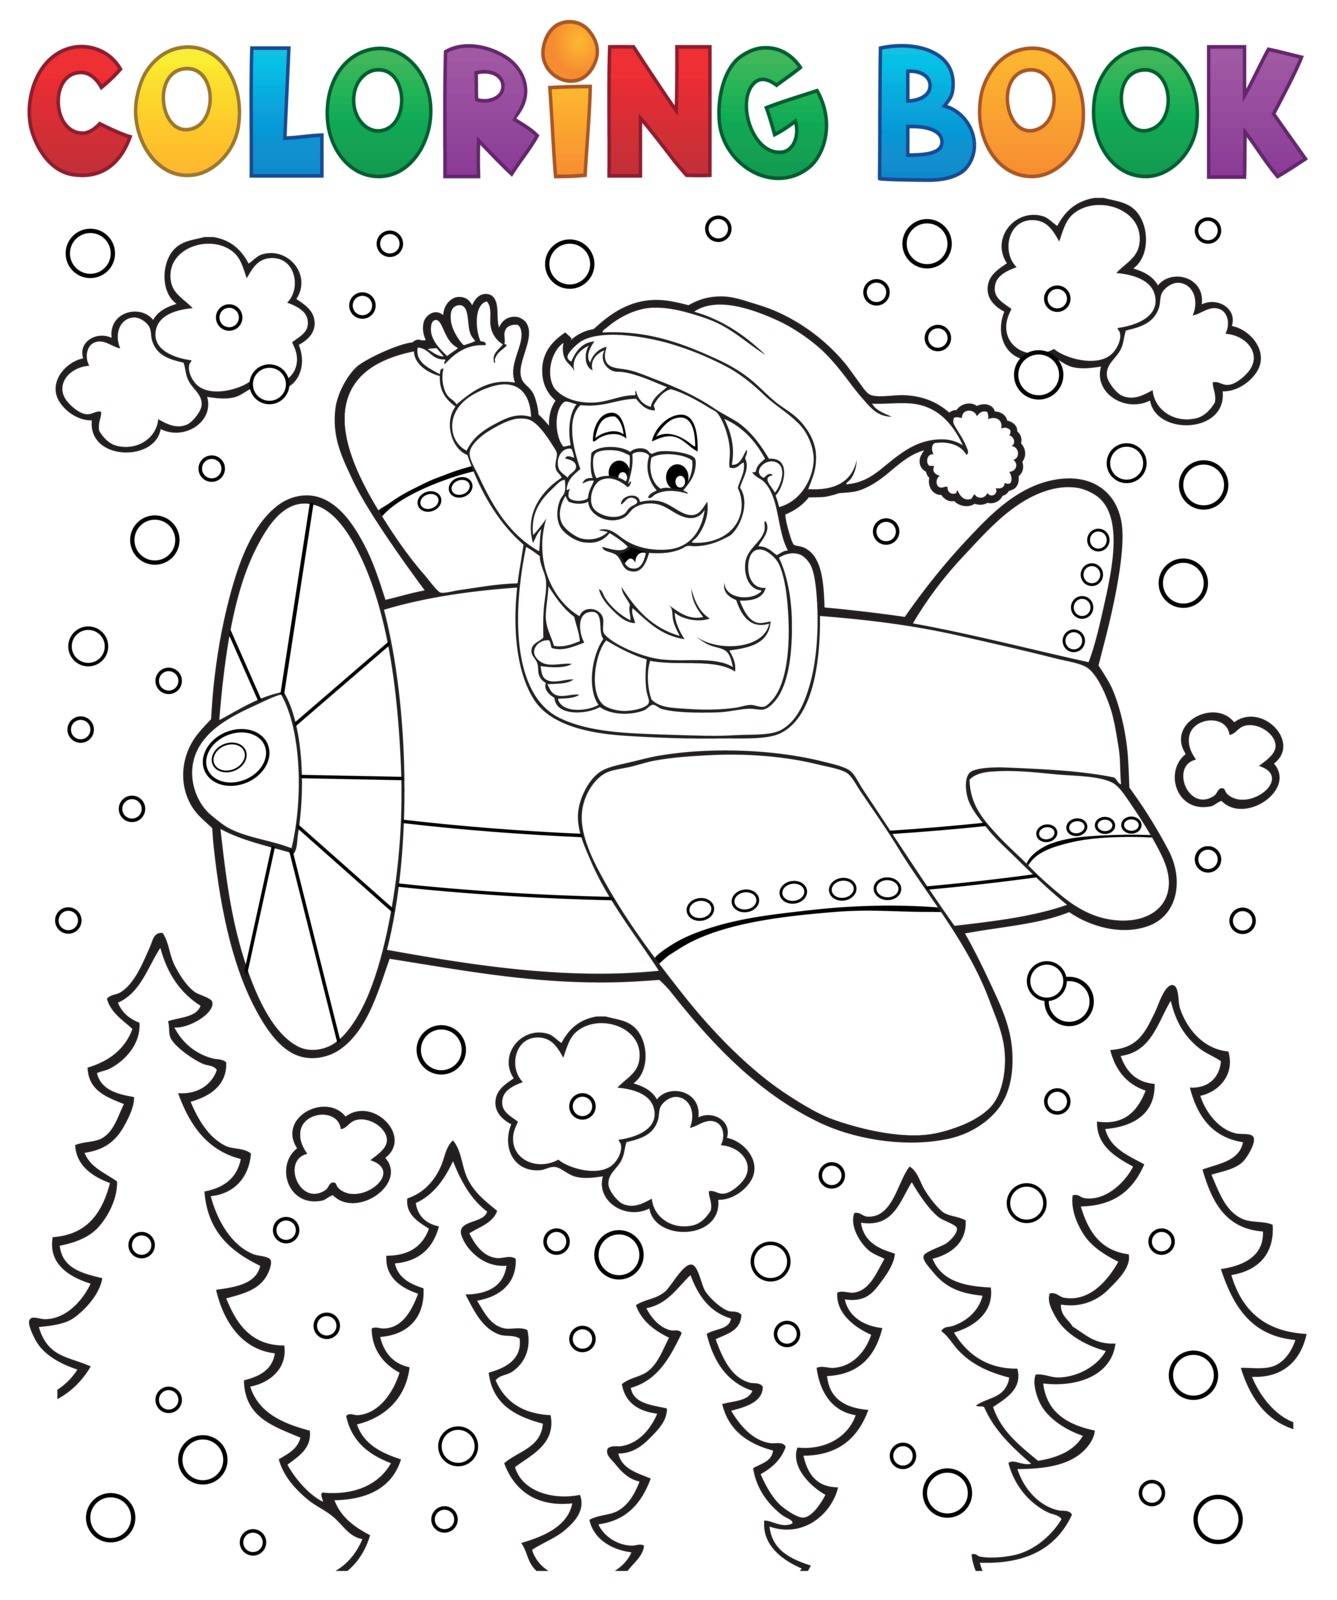 Coloring book Santa Claus in plane by clairev